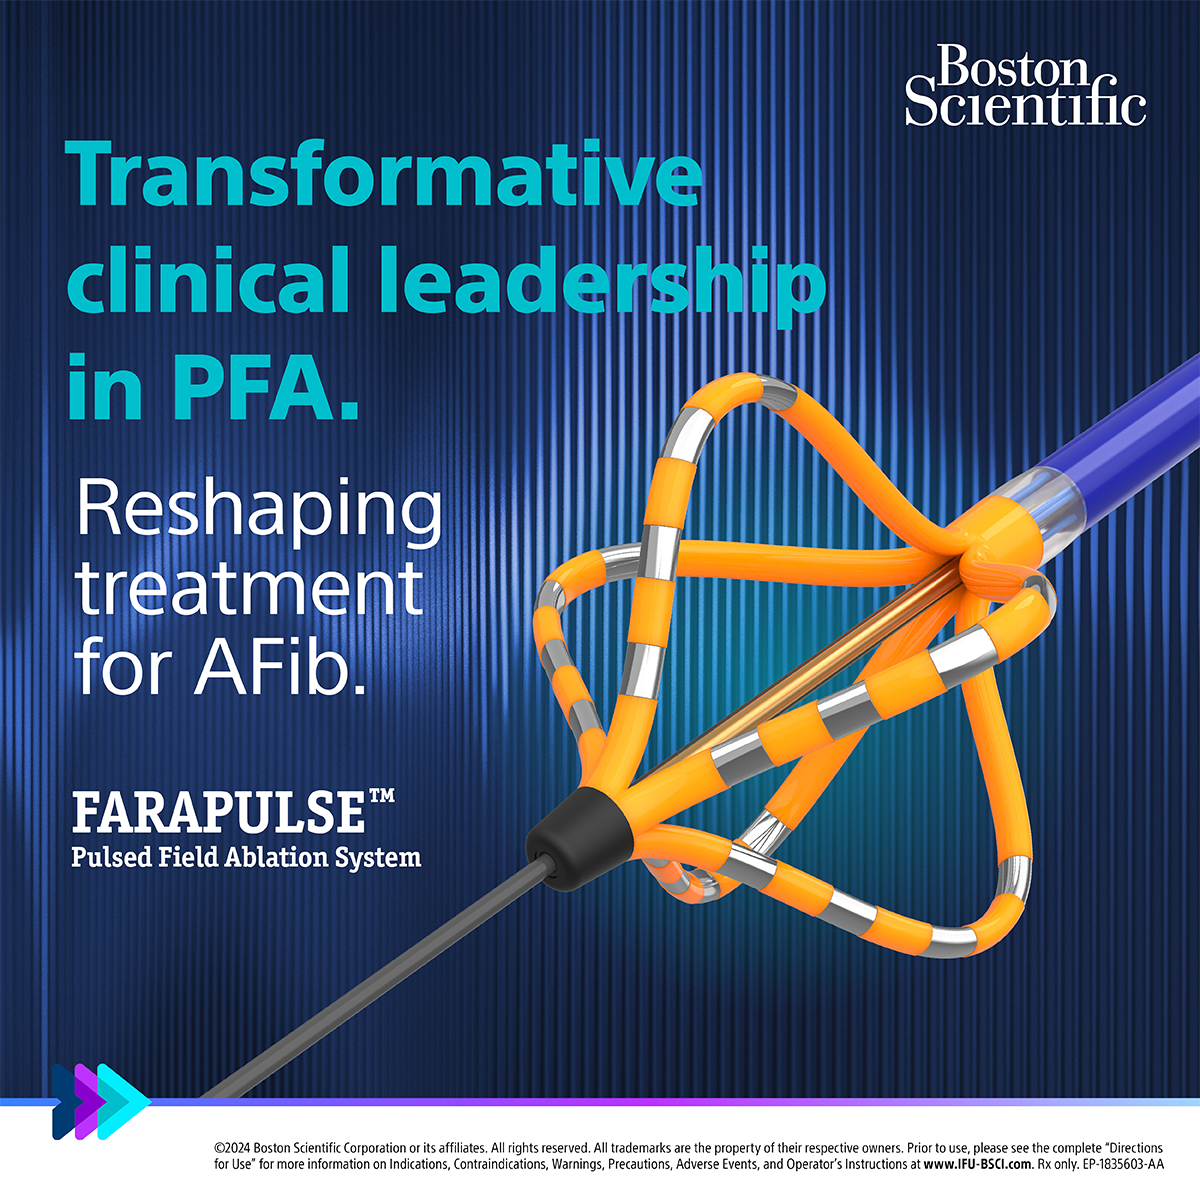 Experience the transformative power of FARAPULSE™: Treating over 40,000 patients globally, it leads in research and clinical evidence among #PulsedFieldAblation systems, revolutionizing paroxysmal #AFib treatment. bit.ly/4aMvHoR Safety info: bit.ly/4aTfluv